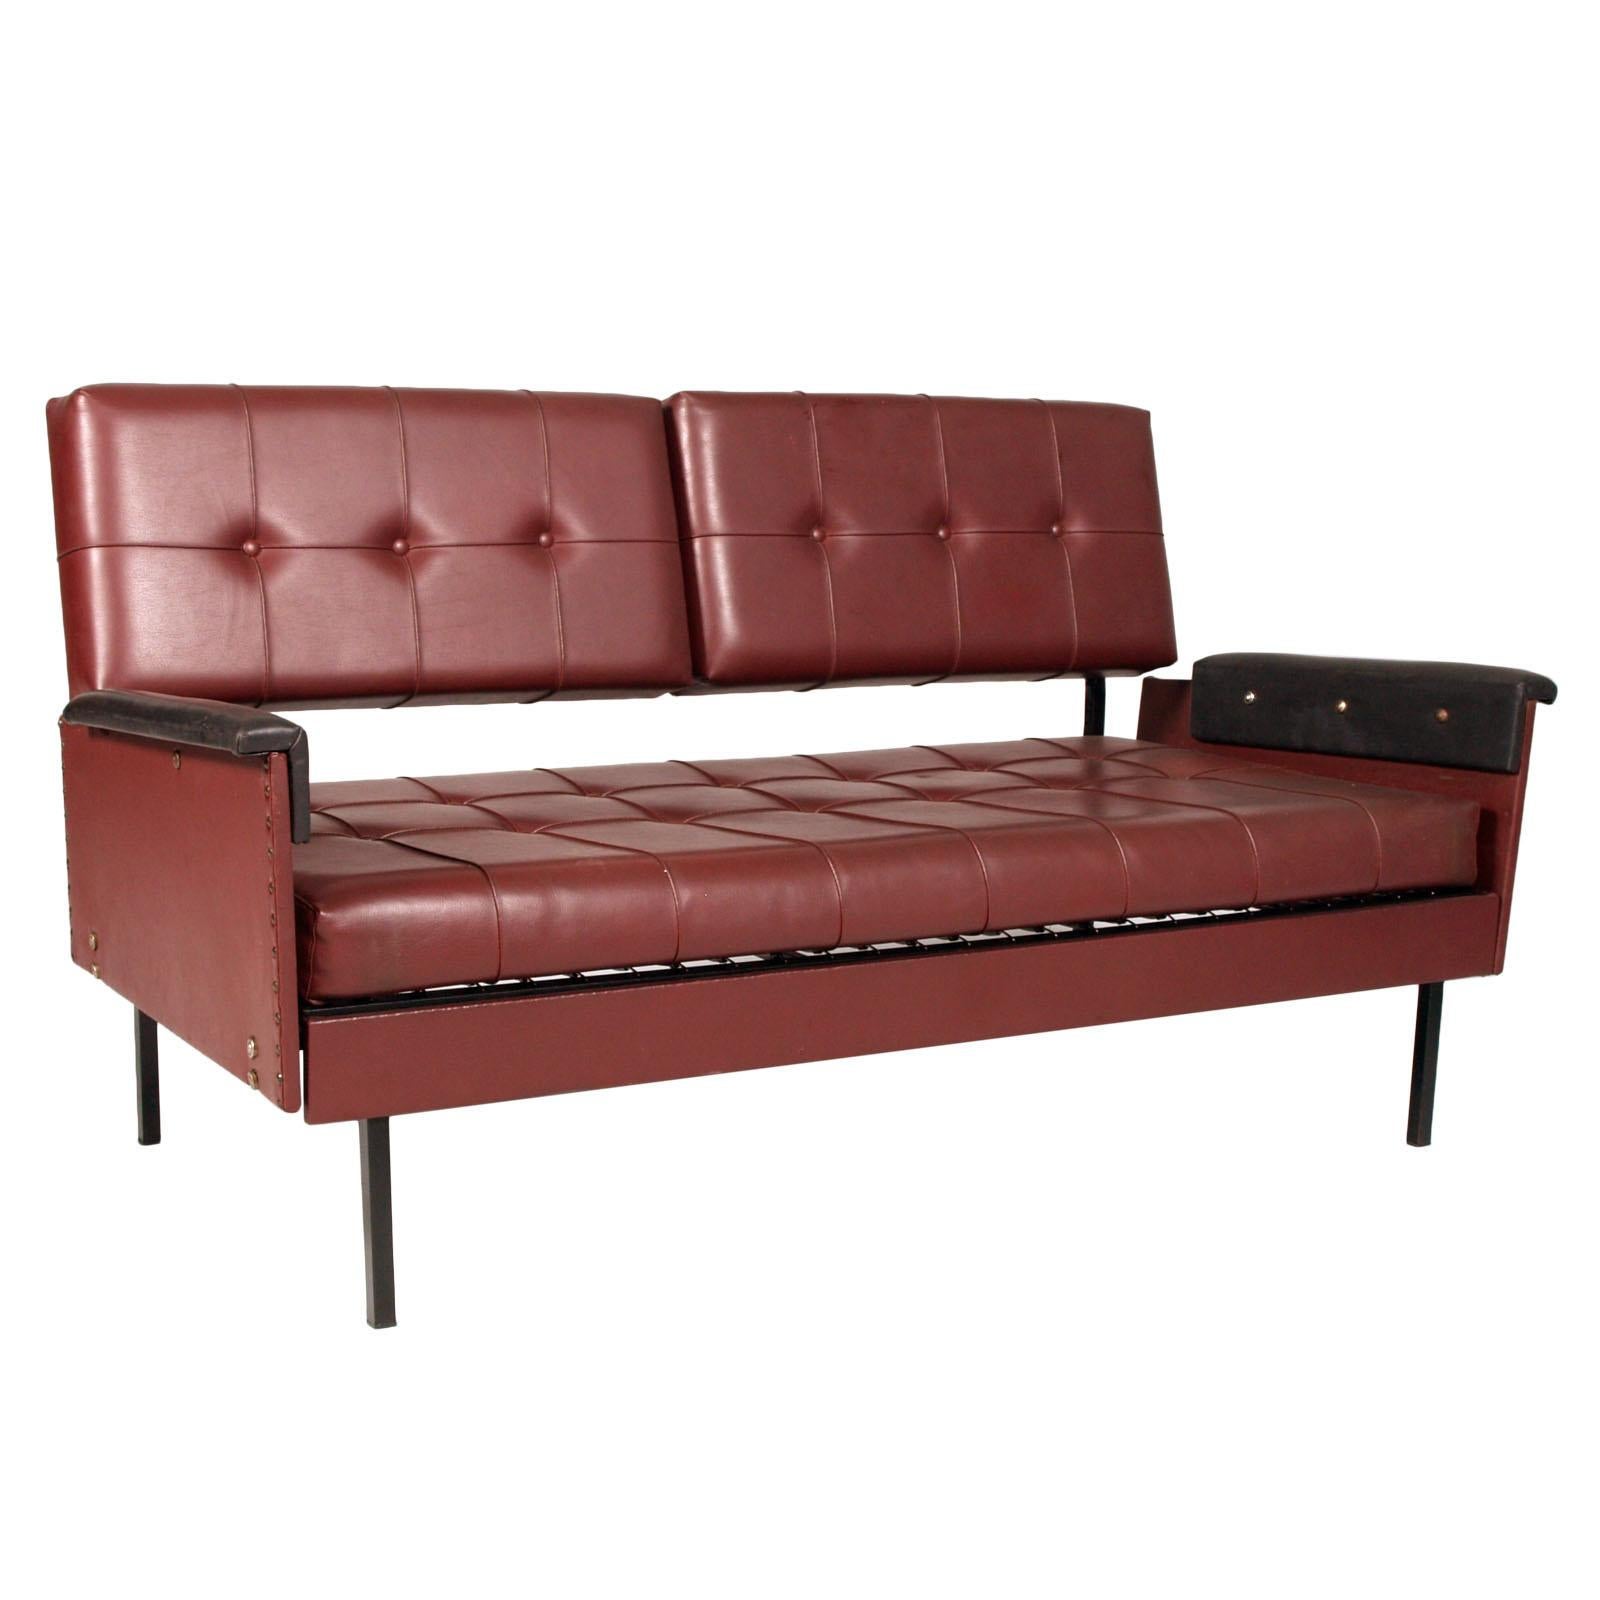 They can be sold separately

Italy 1960s Cubist armchairs and sofa, iron legs, faux leather quilted upholstery.
Structure and legs in painted steel, all removable pillows. The sofa can become a bed by widening the armrests and using the two